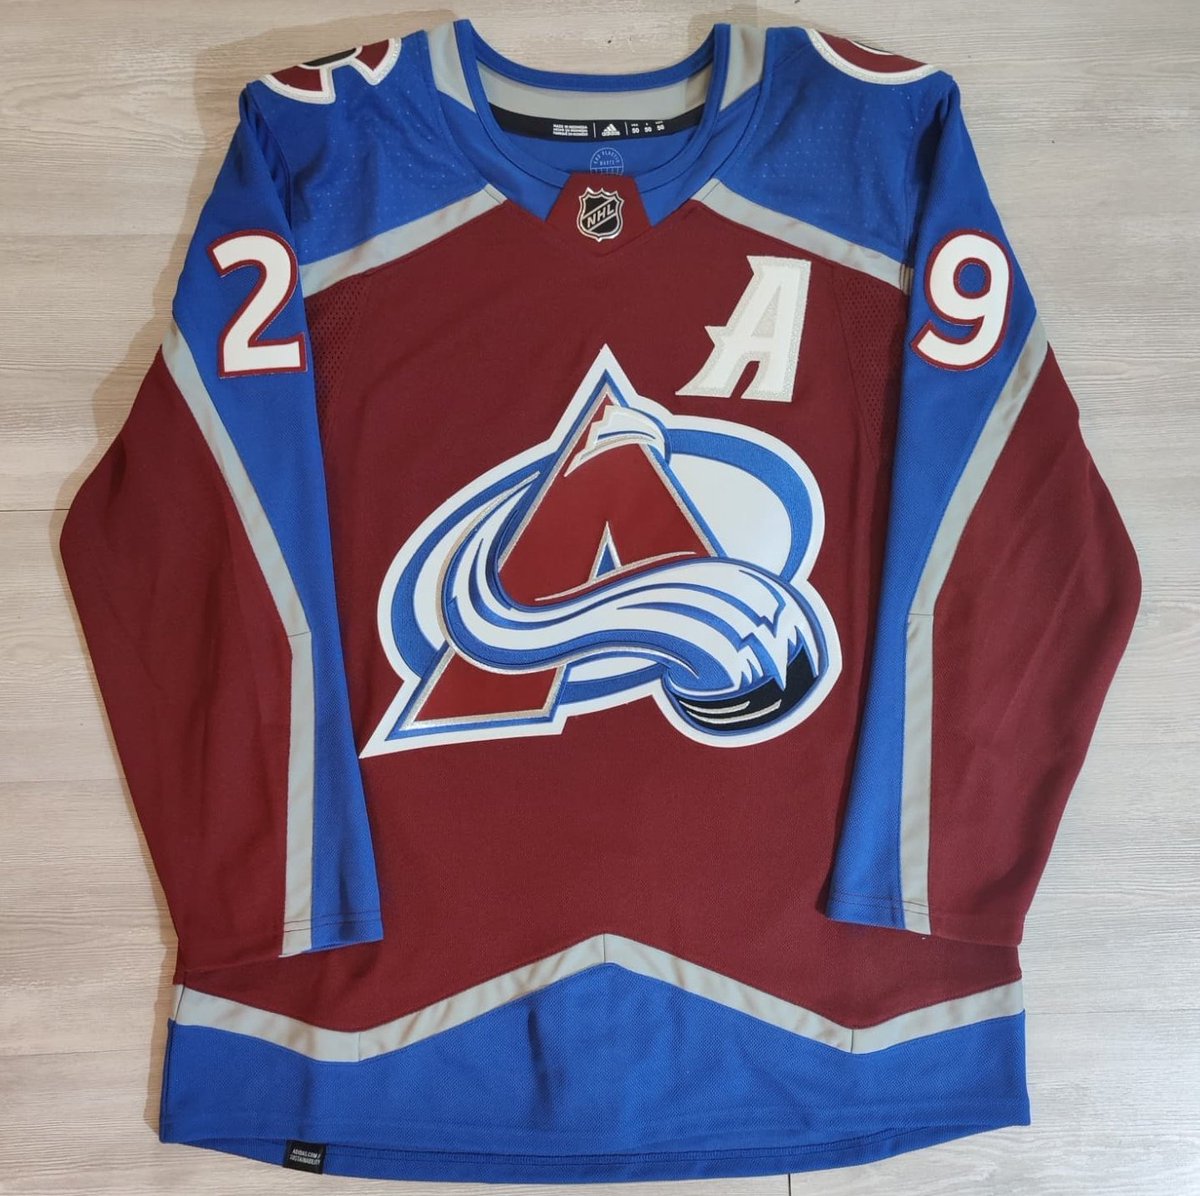 I'm glad the Colorado Avalanche won the Stanley Cup. I'd wear my MacKinnon jersey if hockey jerseys weren't the most impractical piece of clothing you could wear https://t.co/FNKy7mfrvx